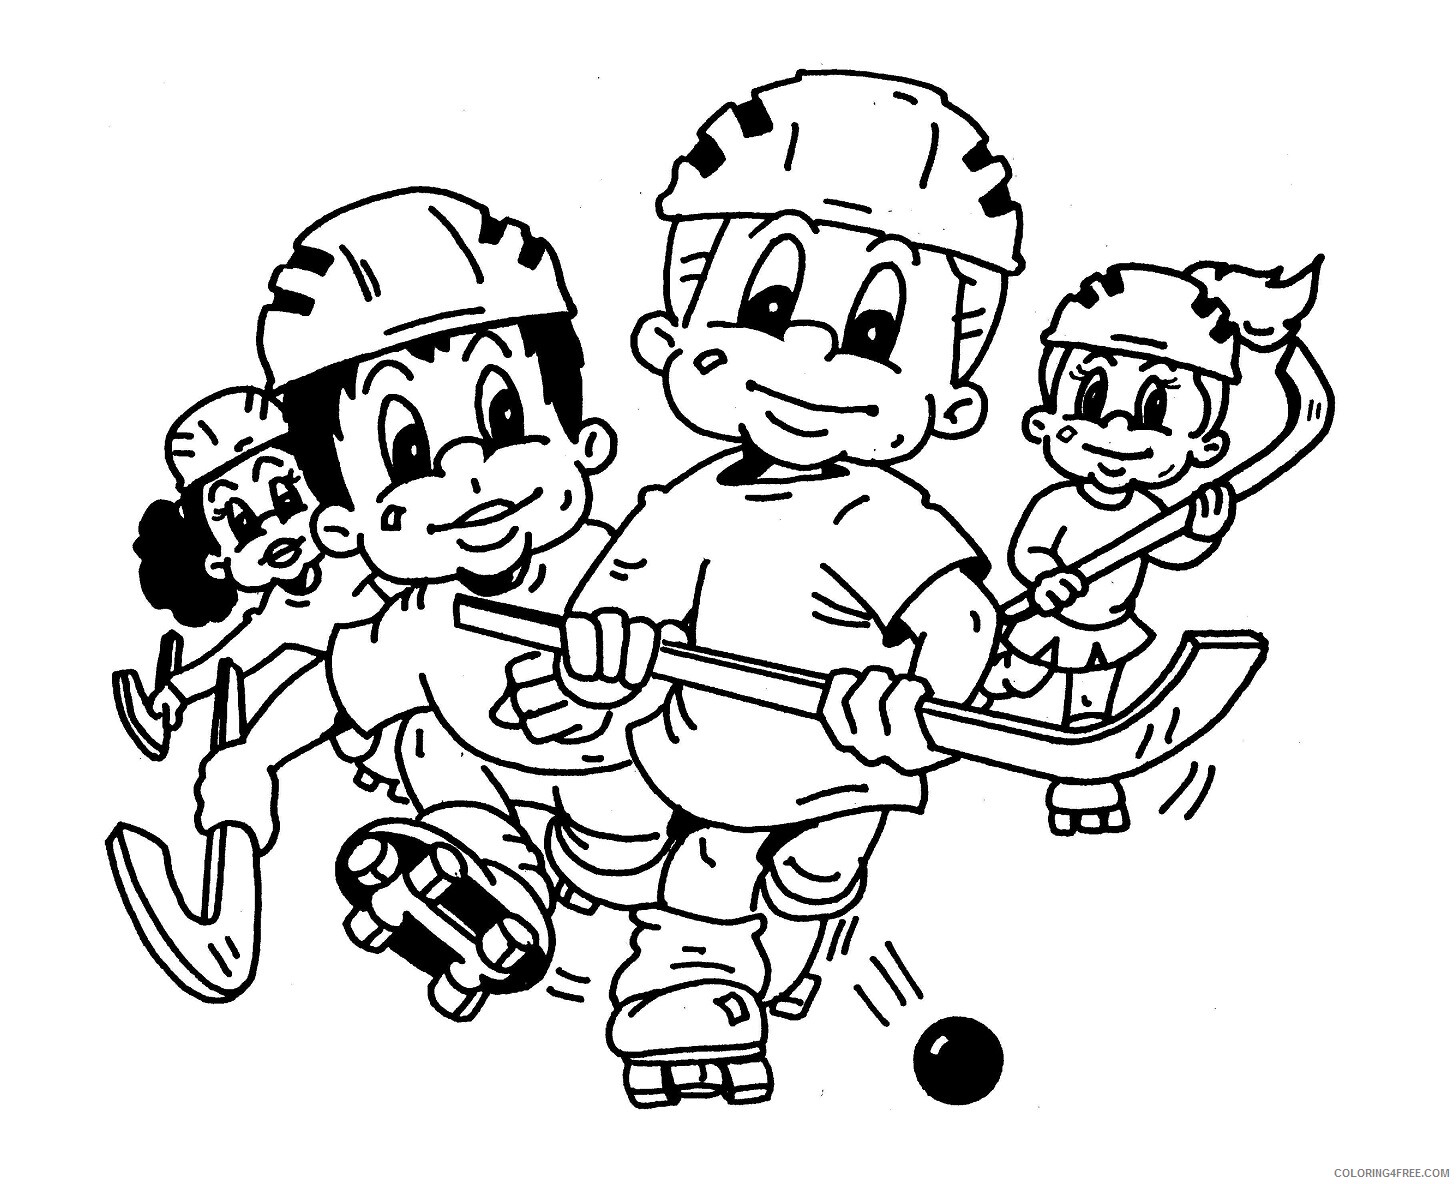 Hockey Coloring Pages luxury hockey colouring pictures Printable 2021 3324 Coloring4free